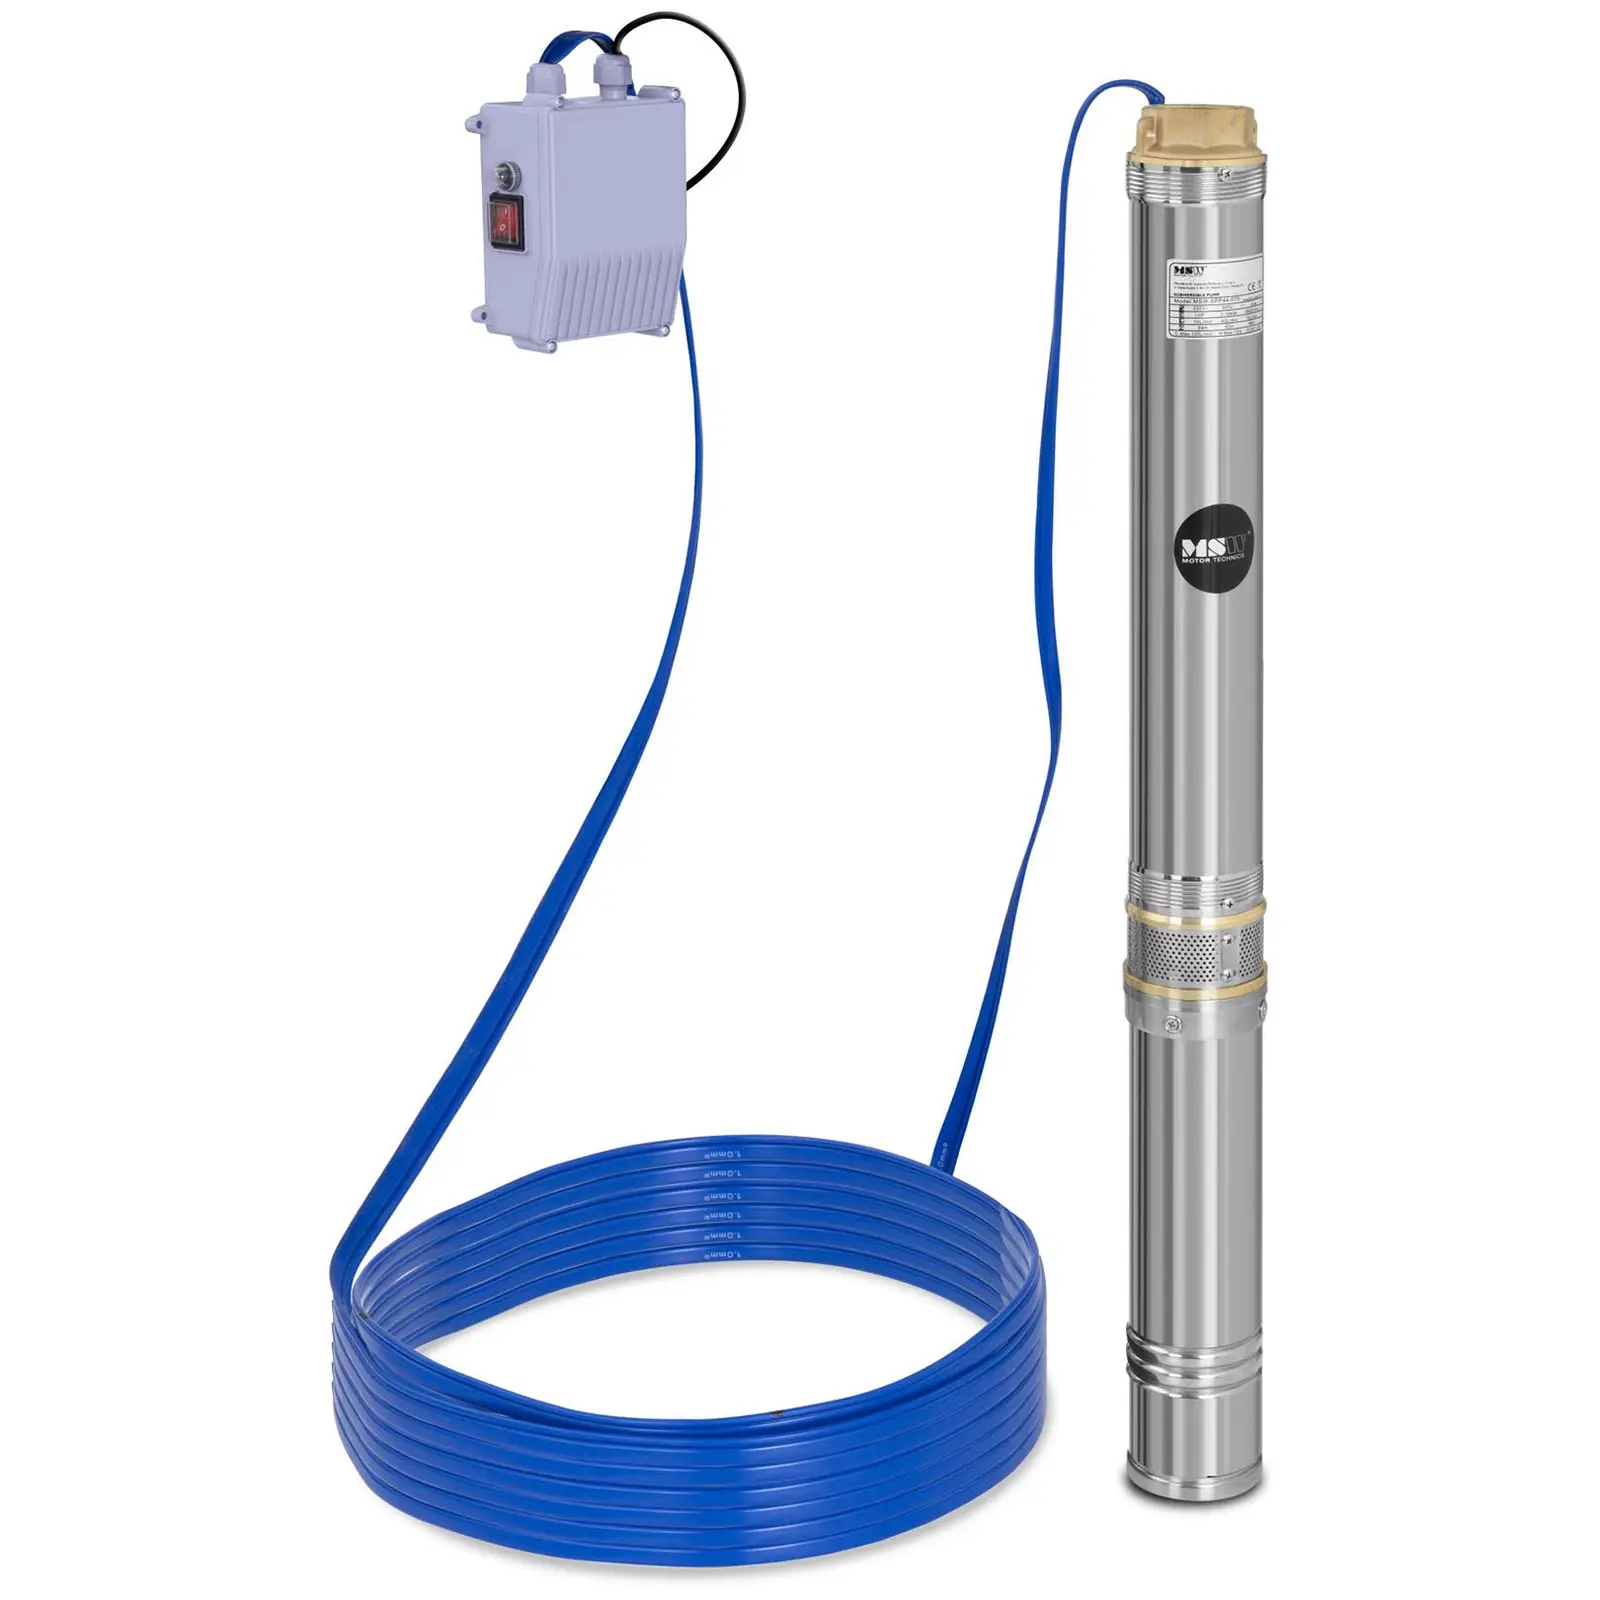 Garden Watering Systems